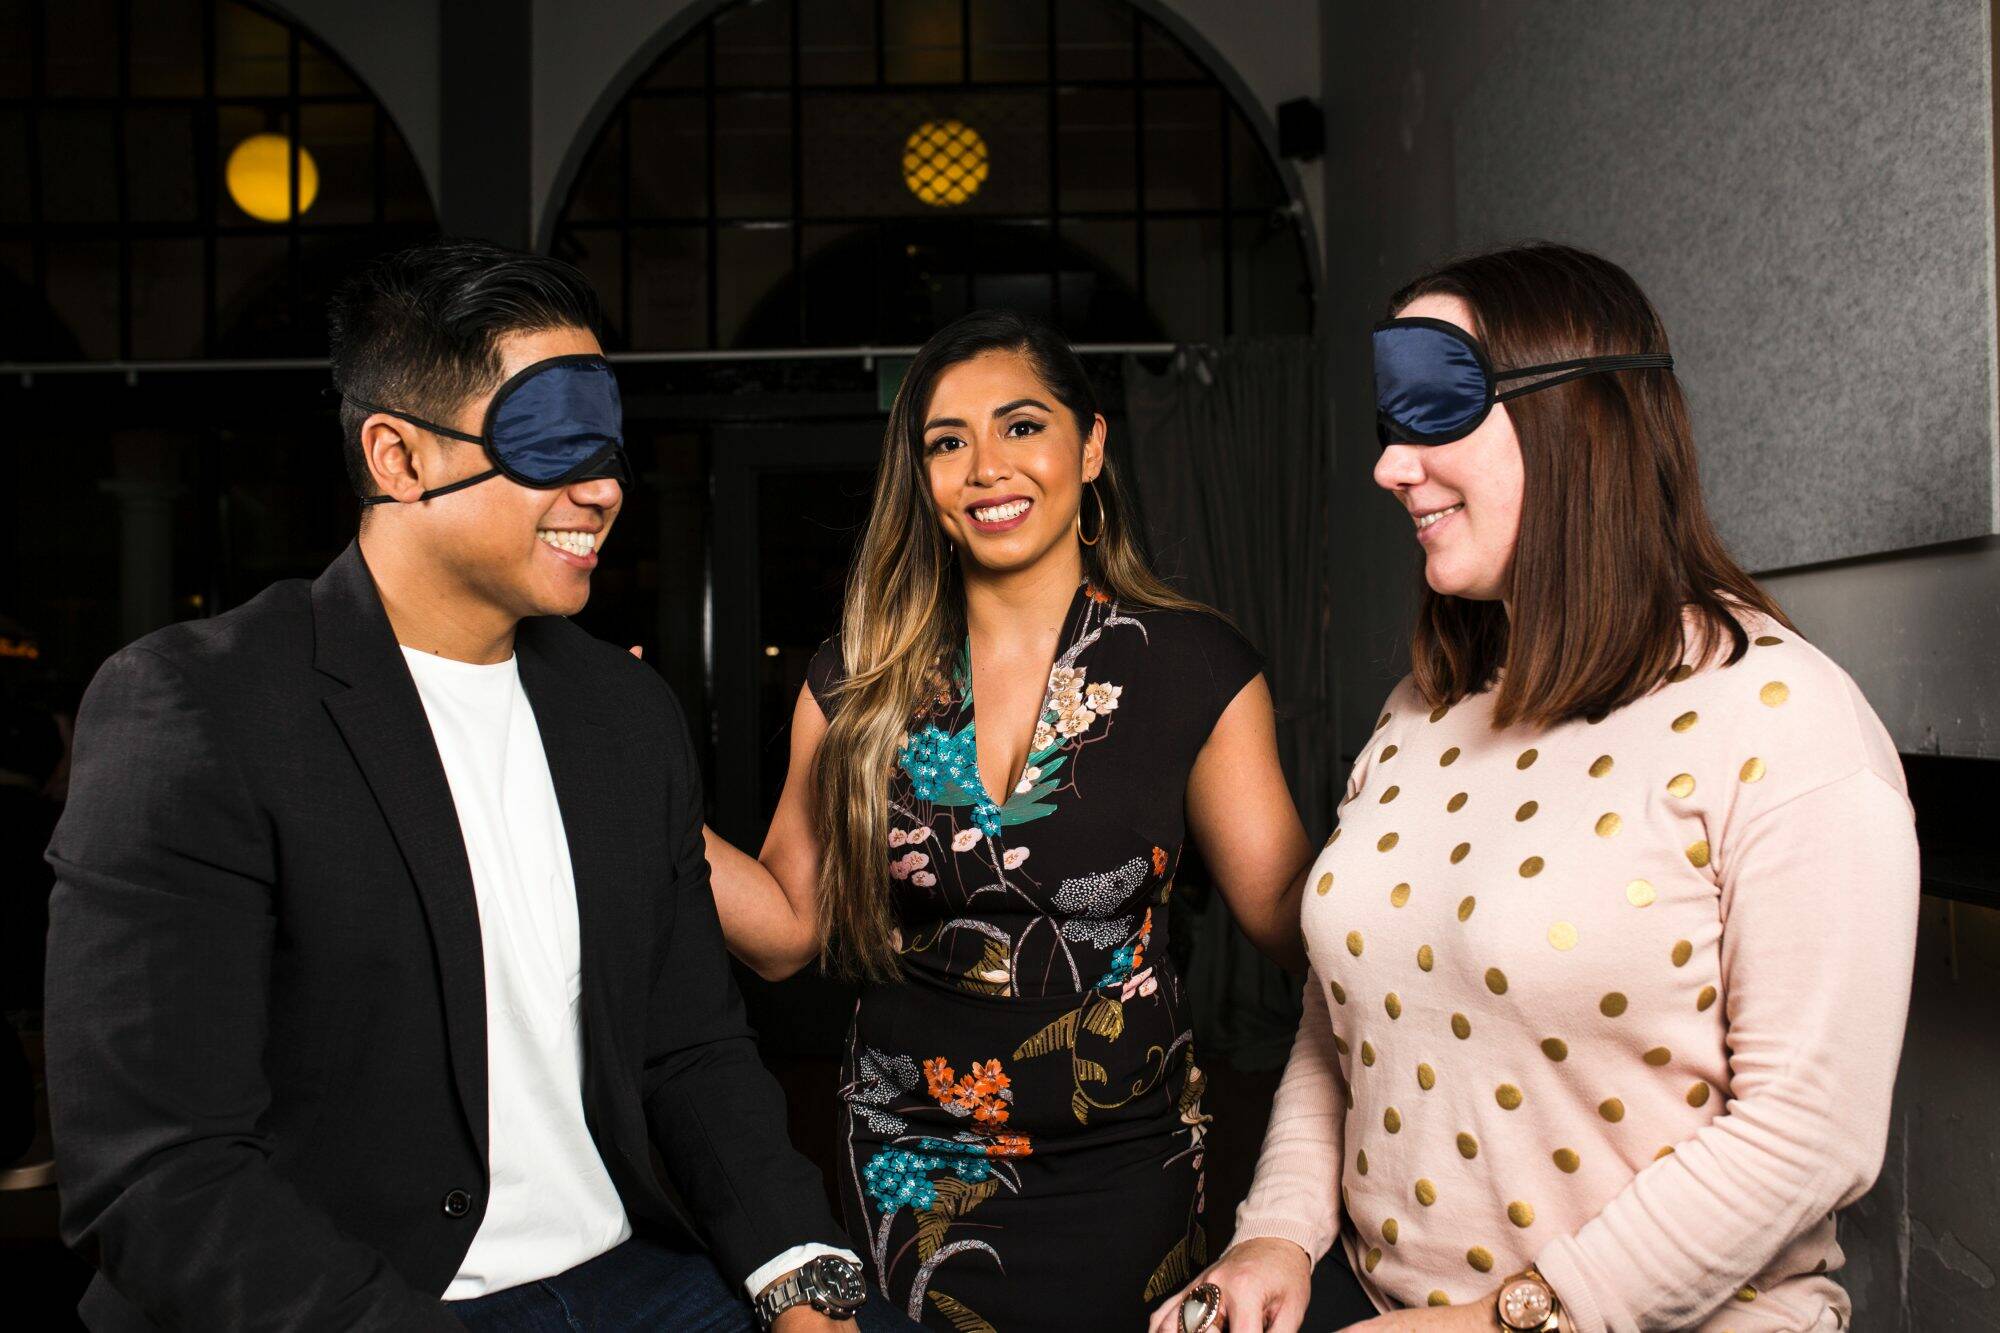 Is love blind? We went speed-dating blindfolded to find out